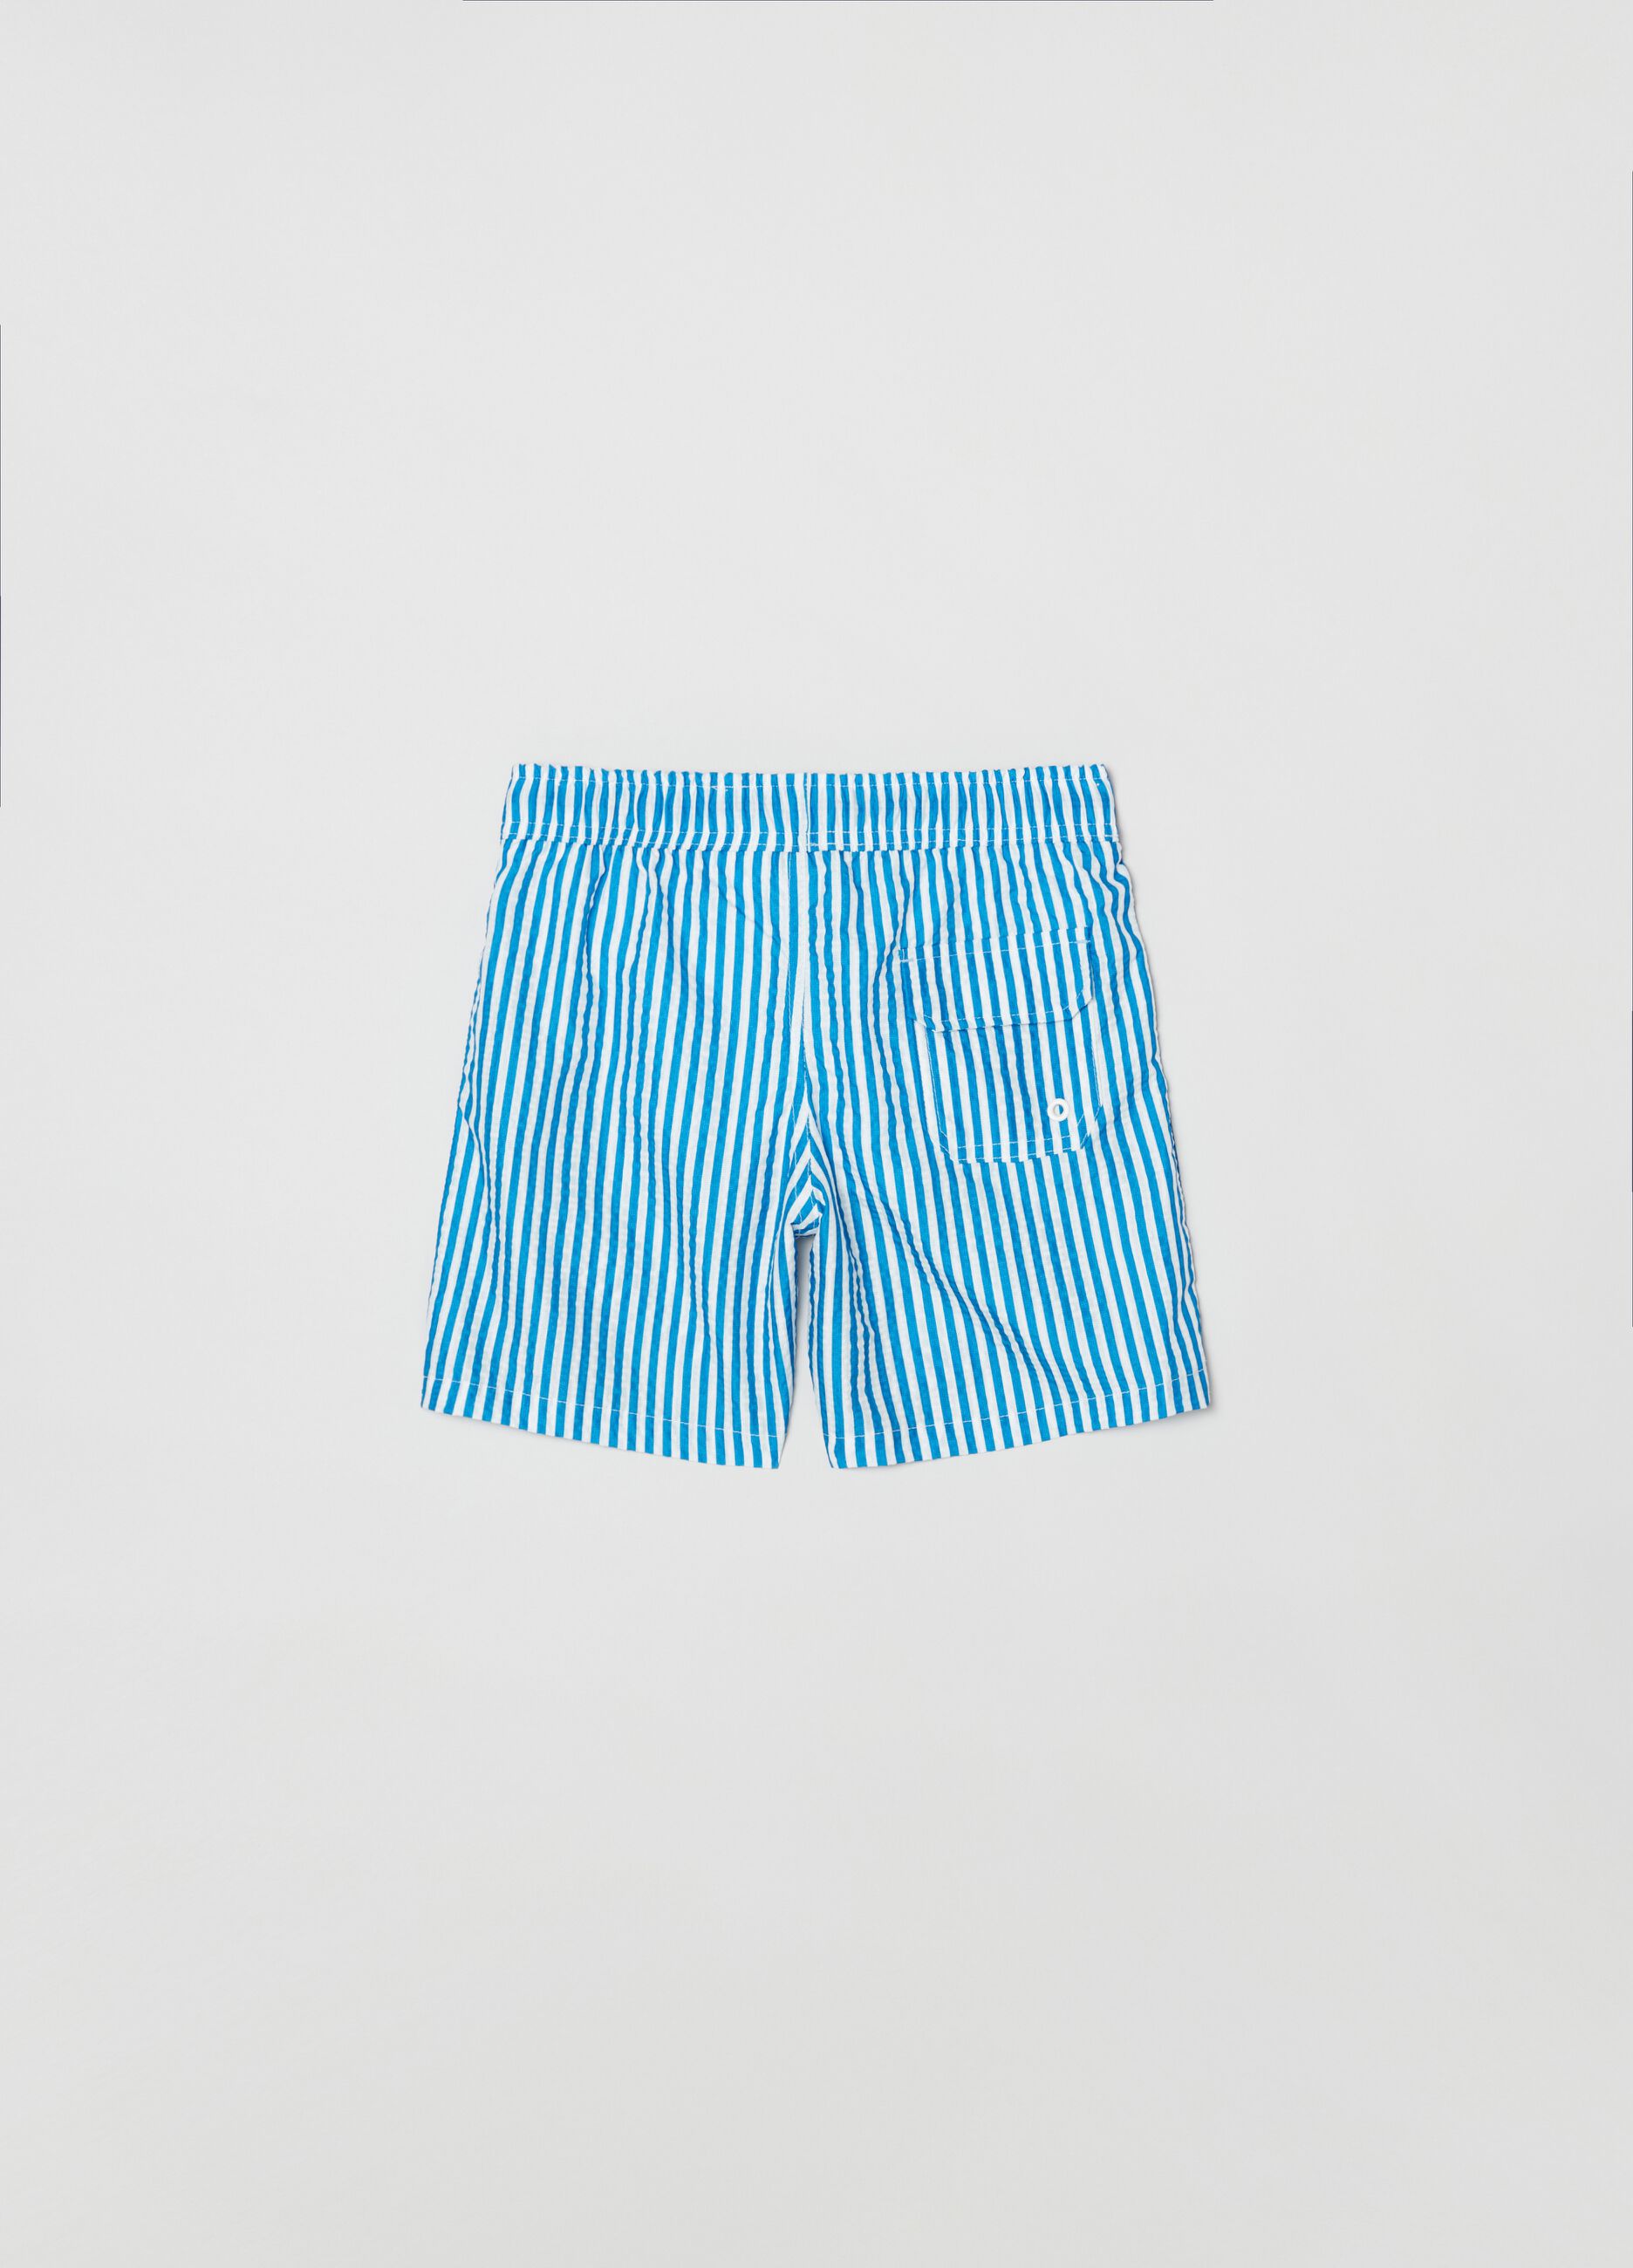 Striped swimming trunks with drawstring